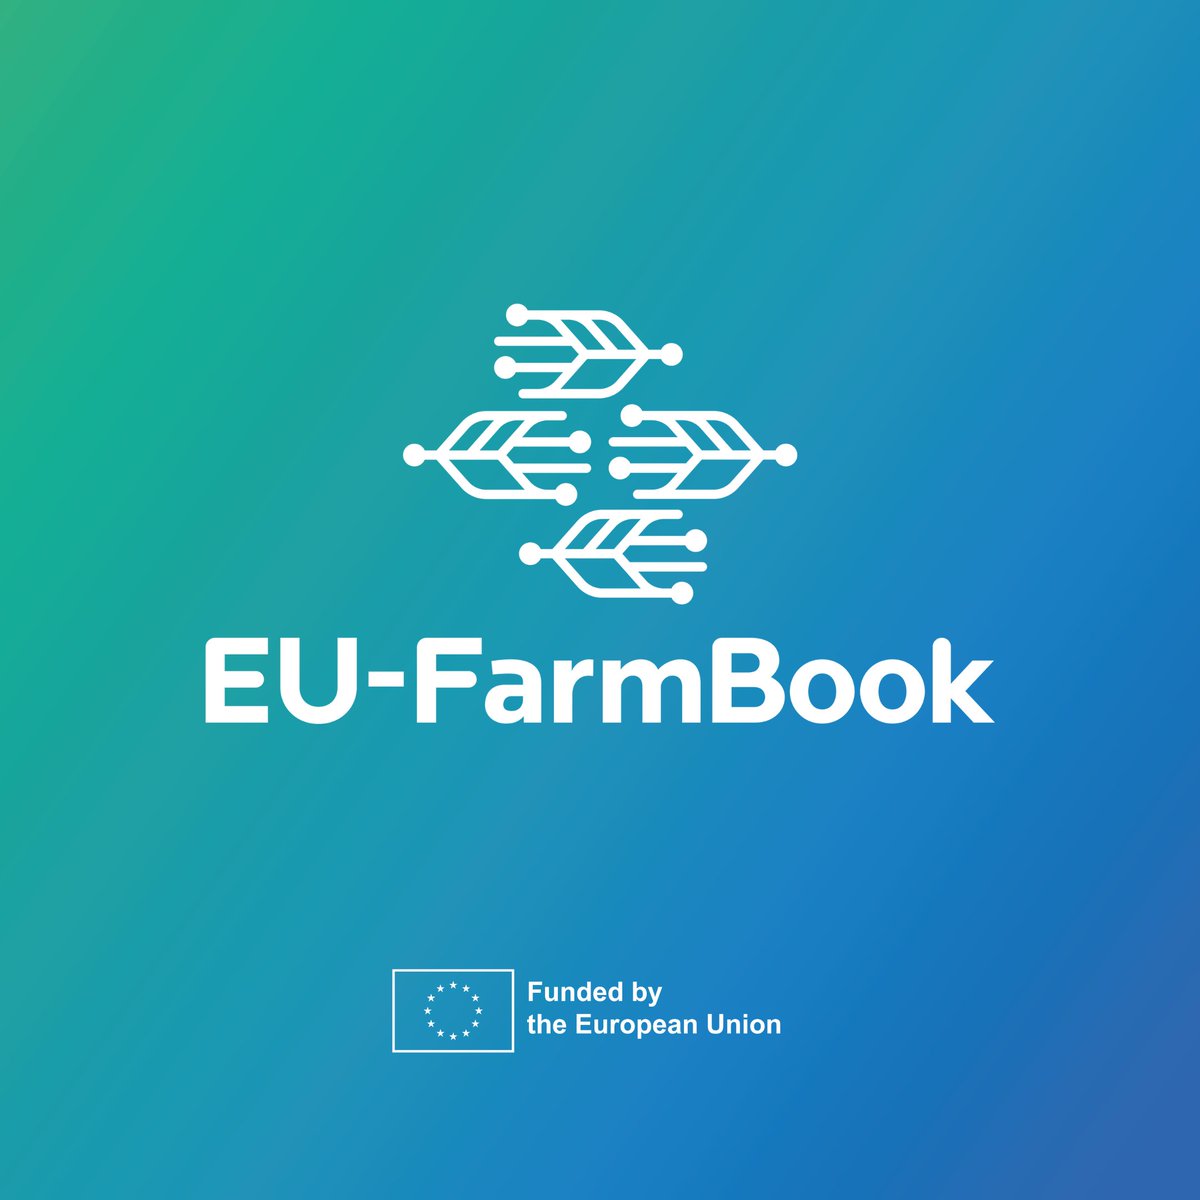 📣📣#EUFarmBook started in August 2022, and for the first time the consortium meets face-to-face in Florence on October 19-21 for the kick off meeting. 🚀​ Get ready because EU-FarmBook will be soon a reality #eufarmbook